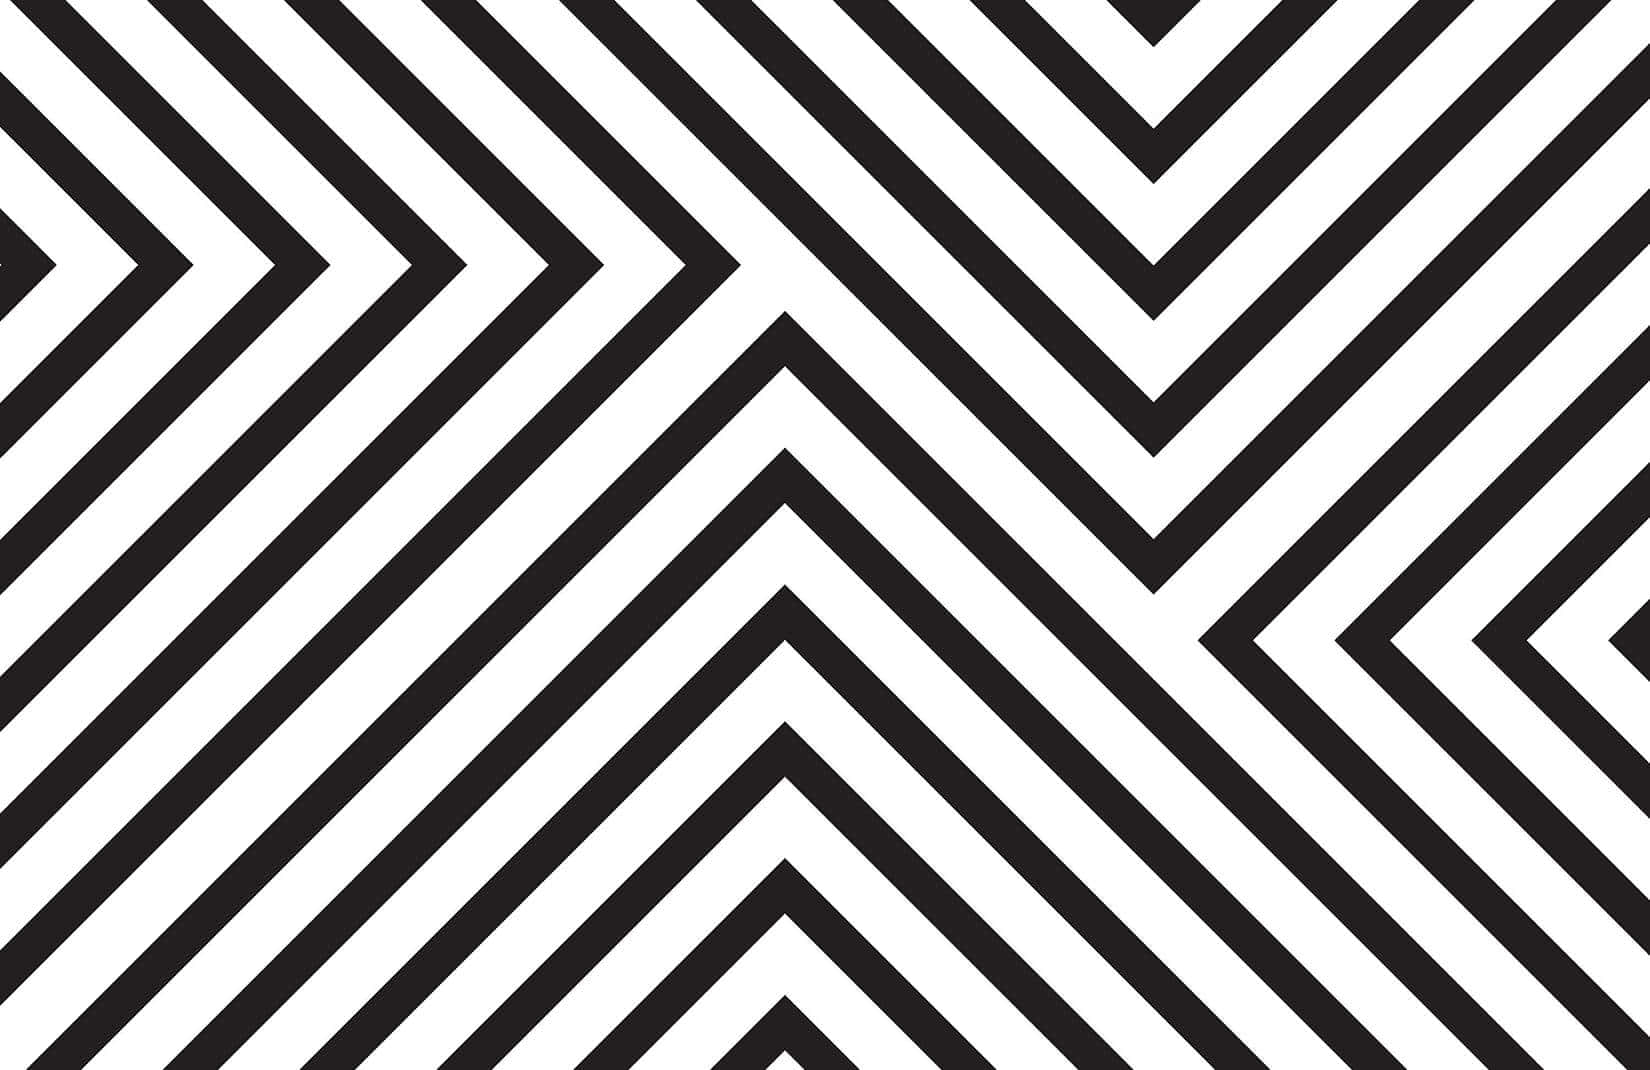 Clear black-and-white striped pattern with striking contrast